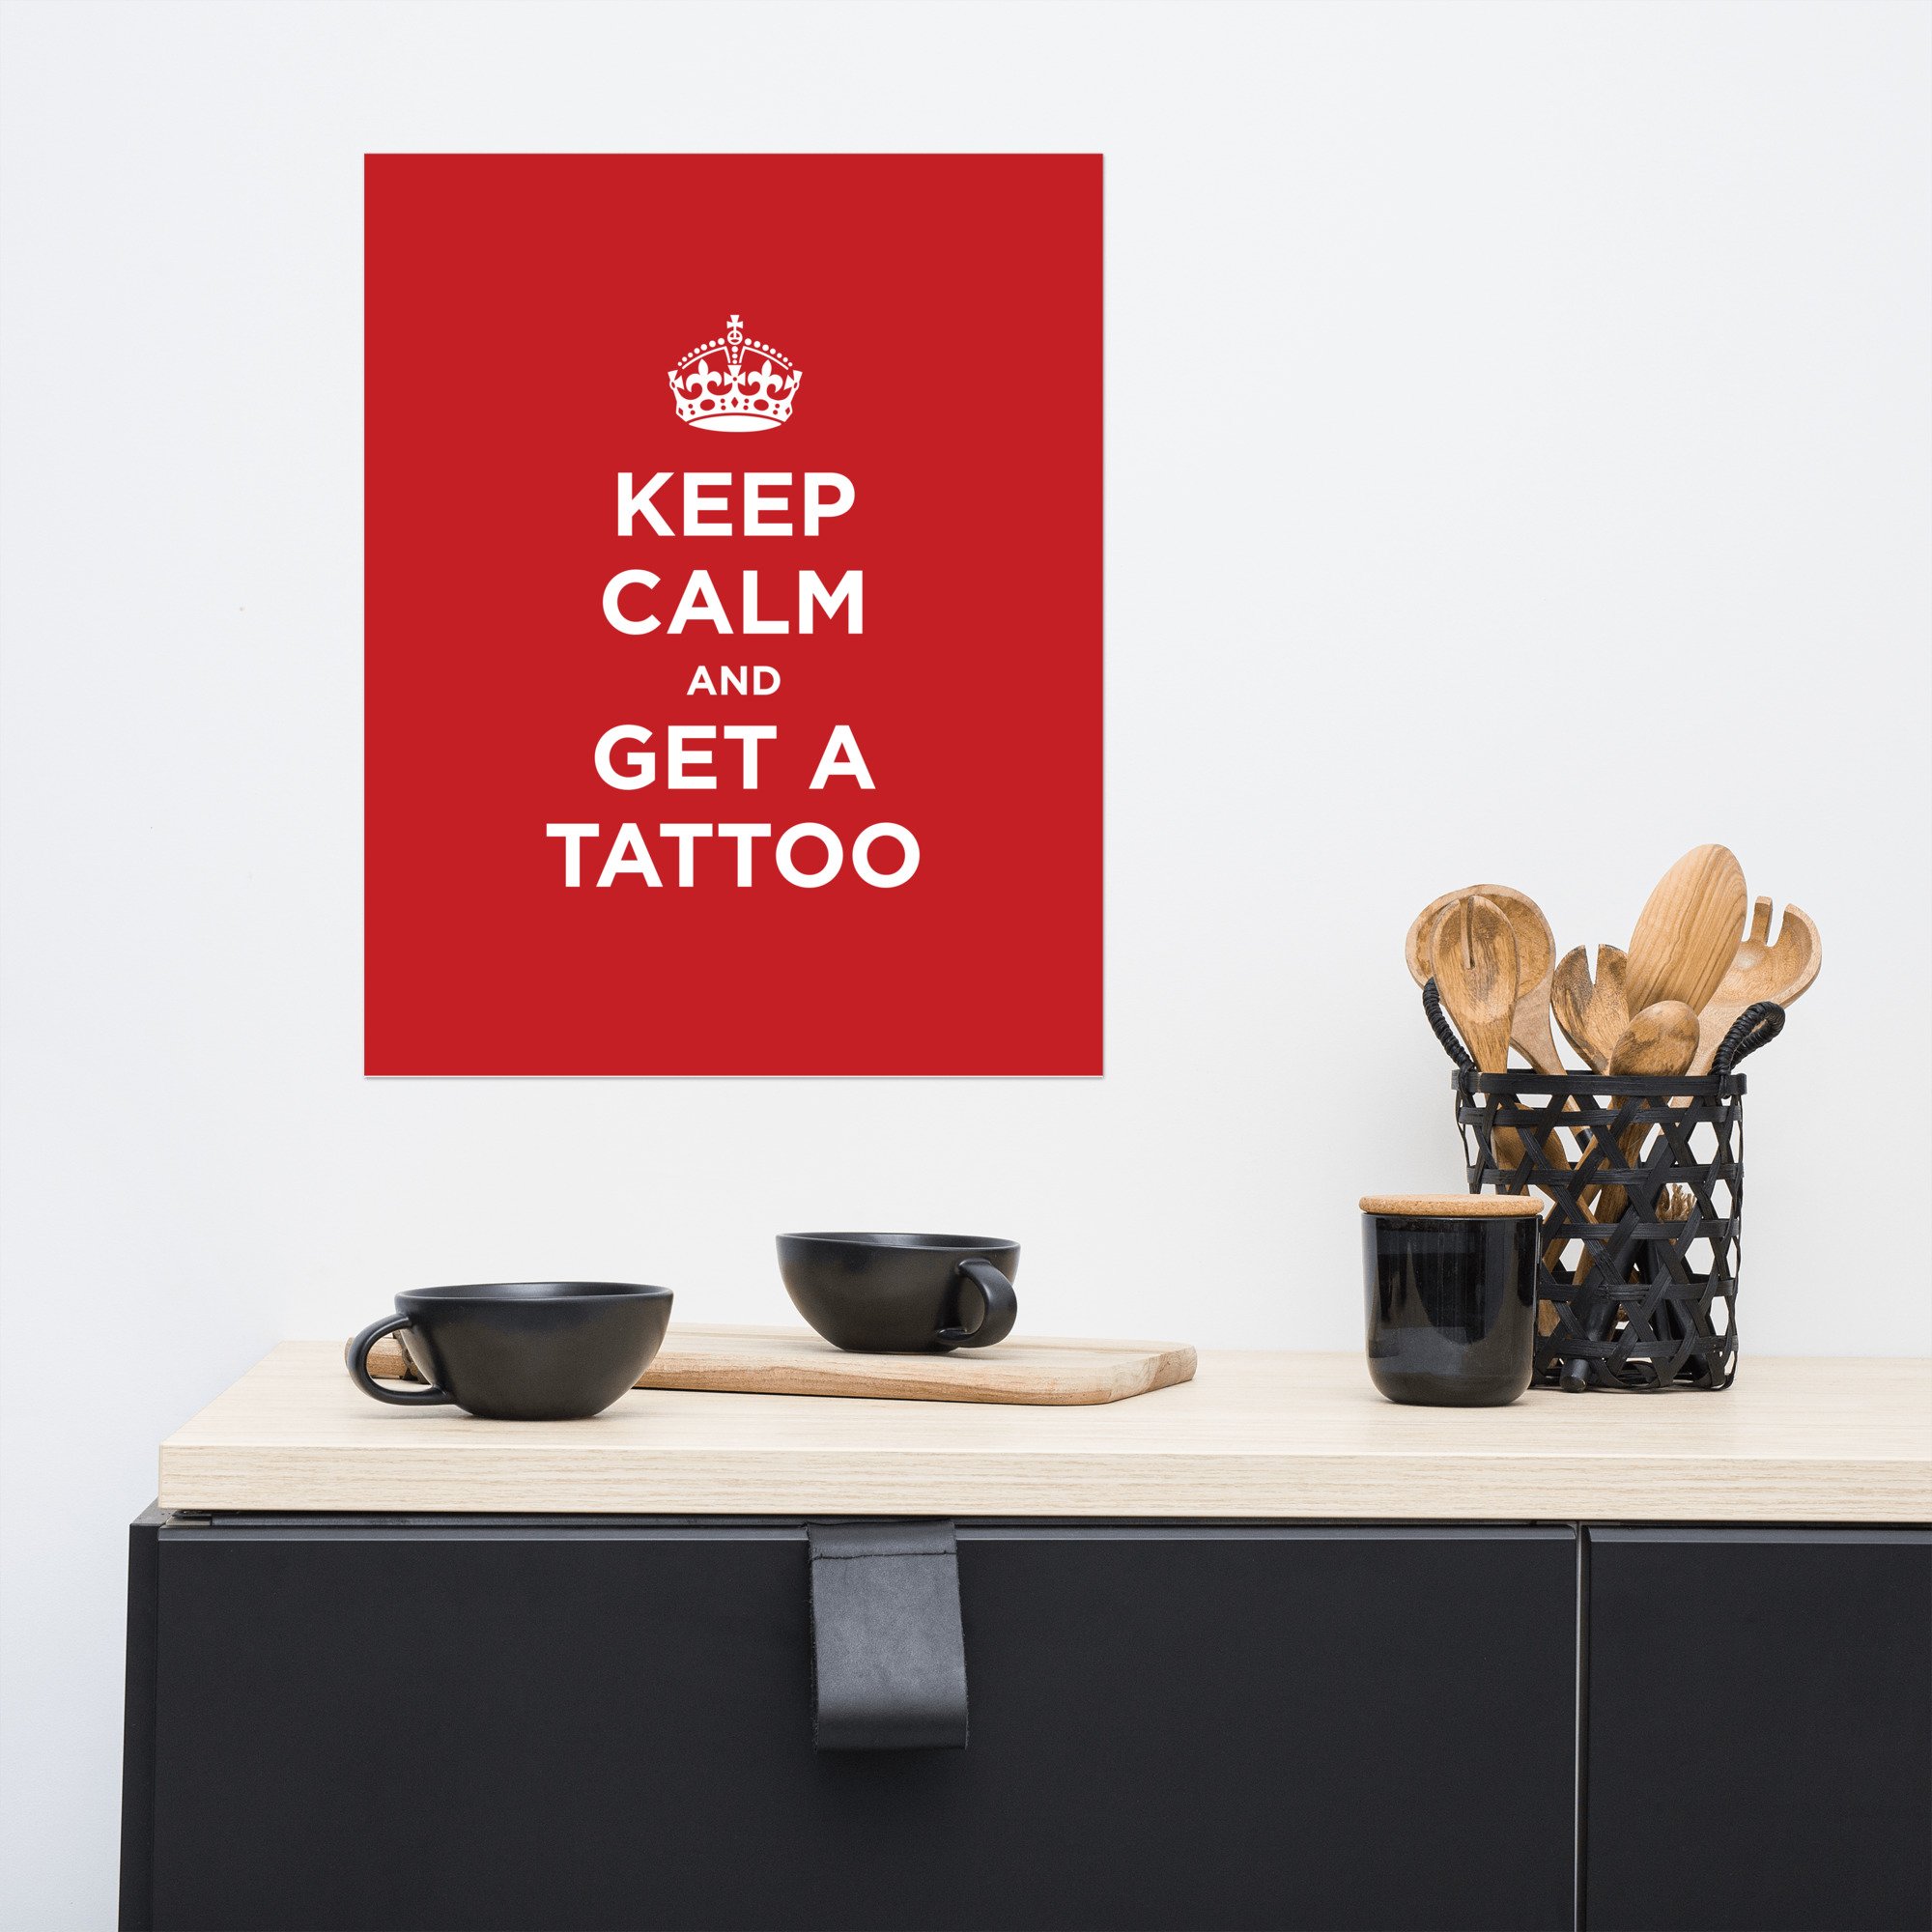 Keep Calm and Carry On Tattoo by Sirius-Tattoo on DeviantArt